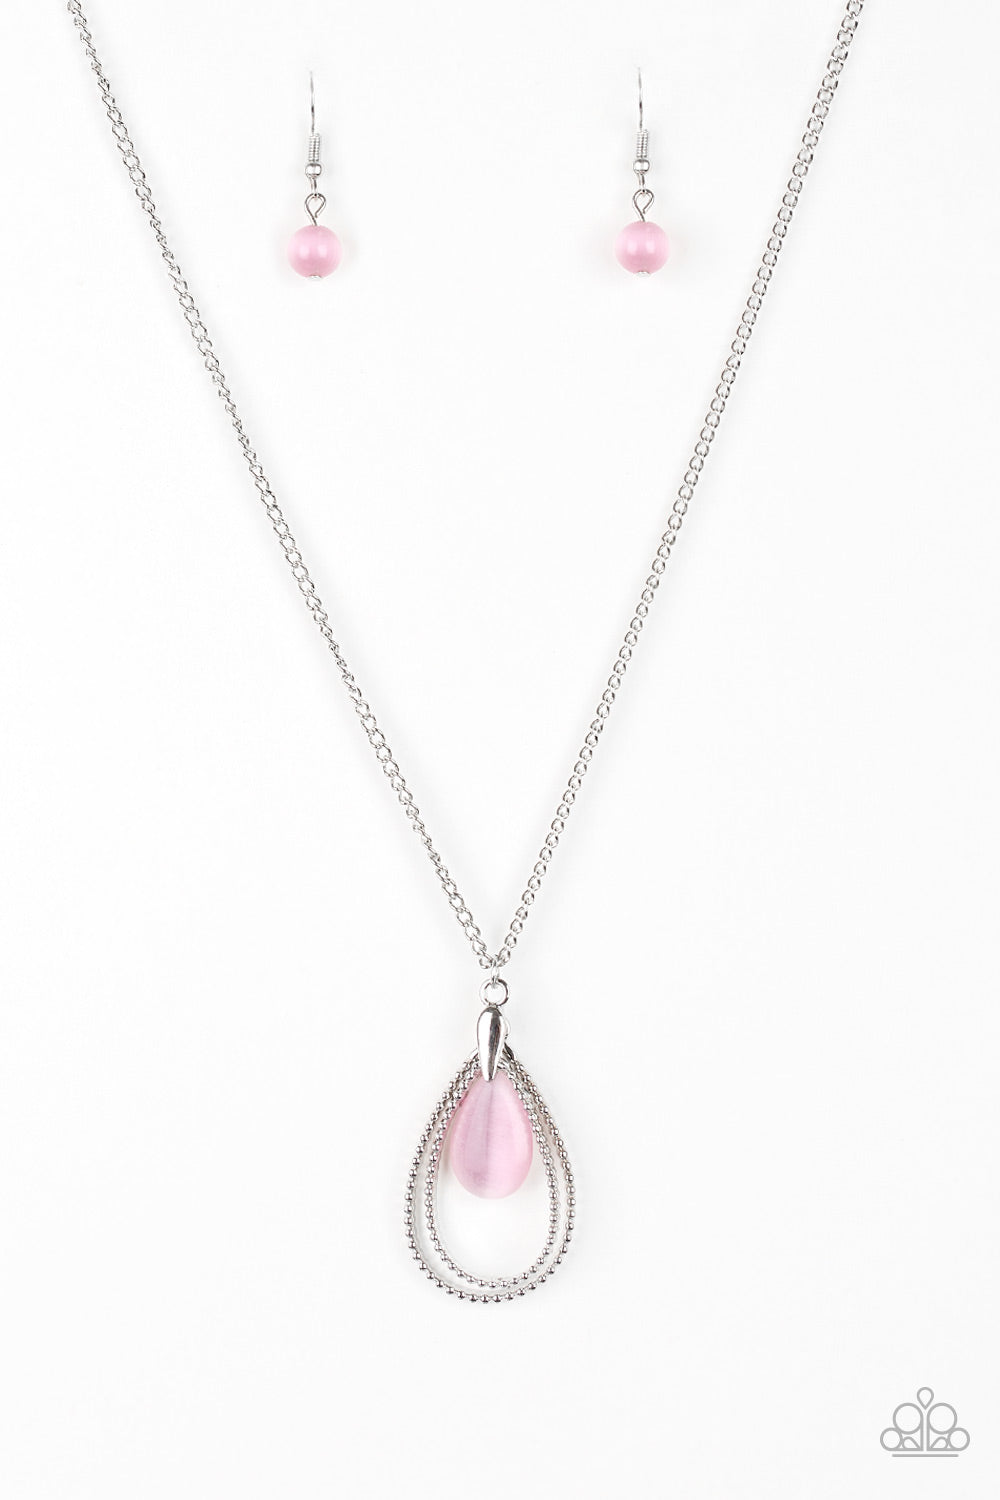 Paparazzi Necklace - Teardrop Tranquility - Pink